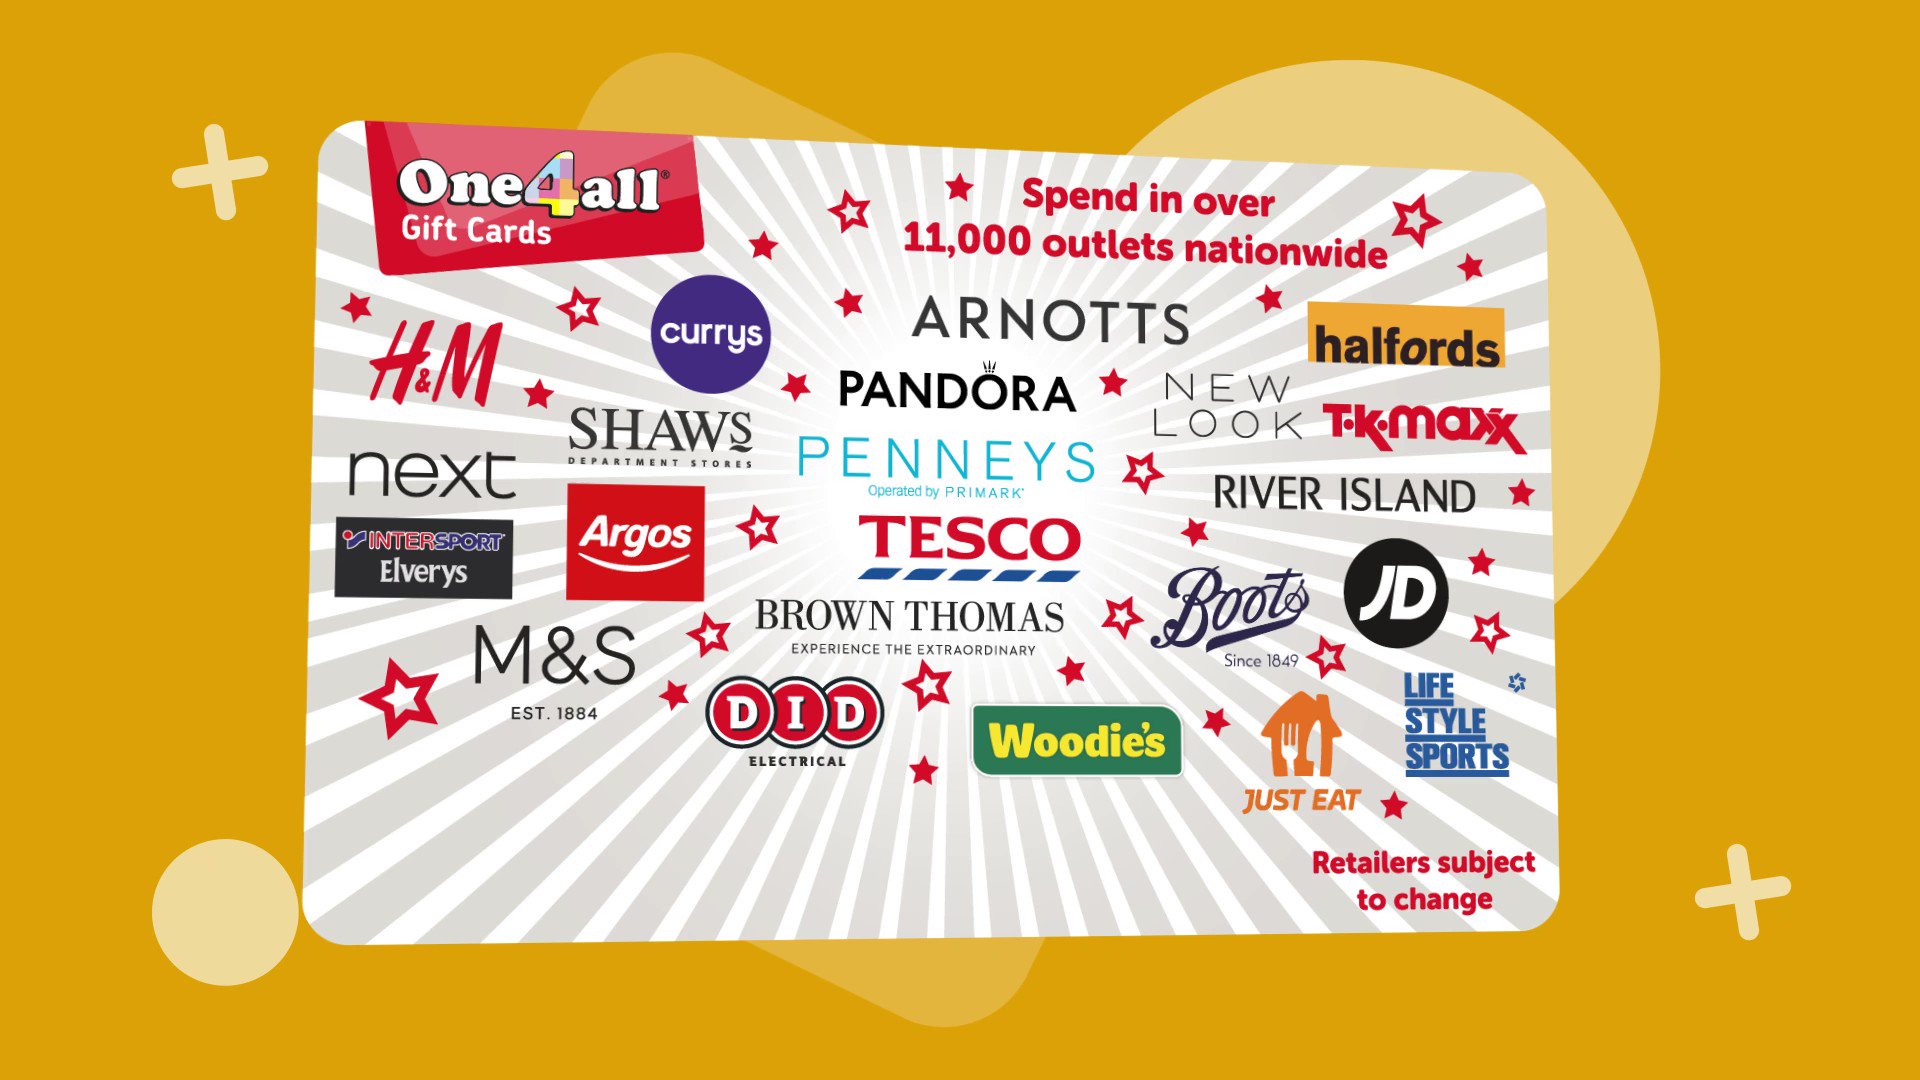 Does Tesco Take One4All Vouchers In 2022? (Full Guide)